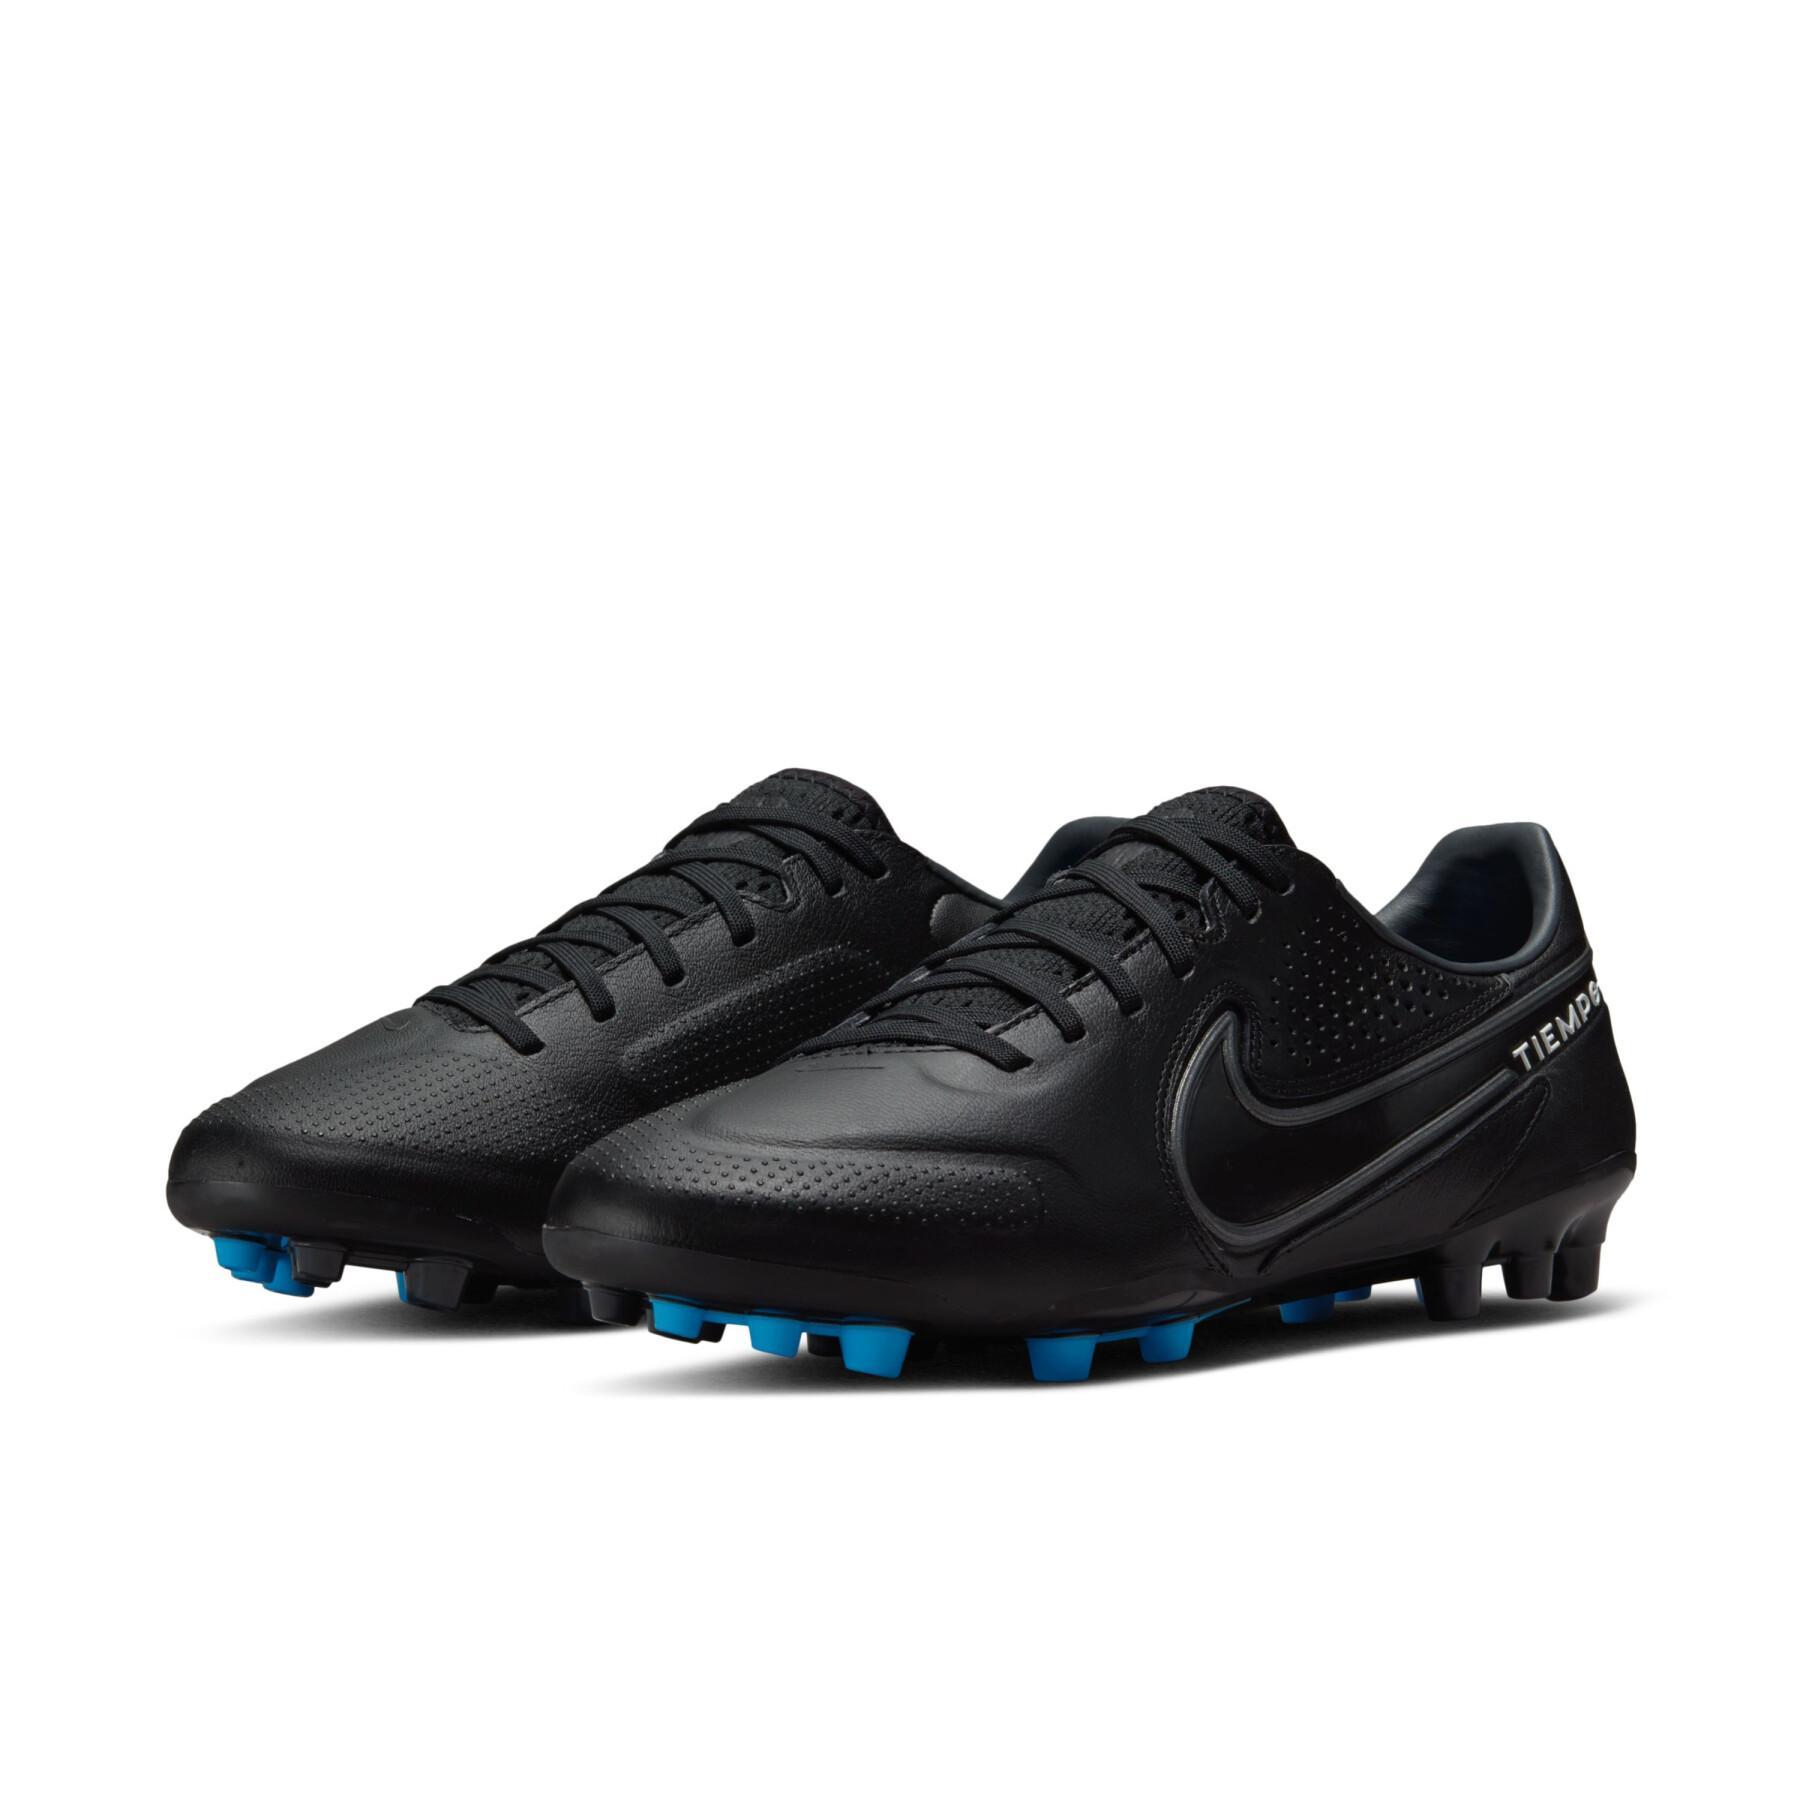 Soccer shoes Nike Tiempo Legend 9 Pro AG-Pro- Shadow Black Pack